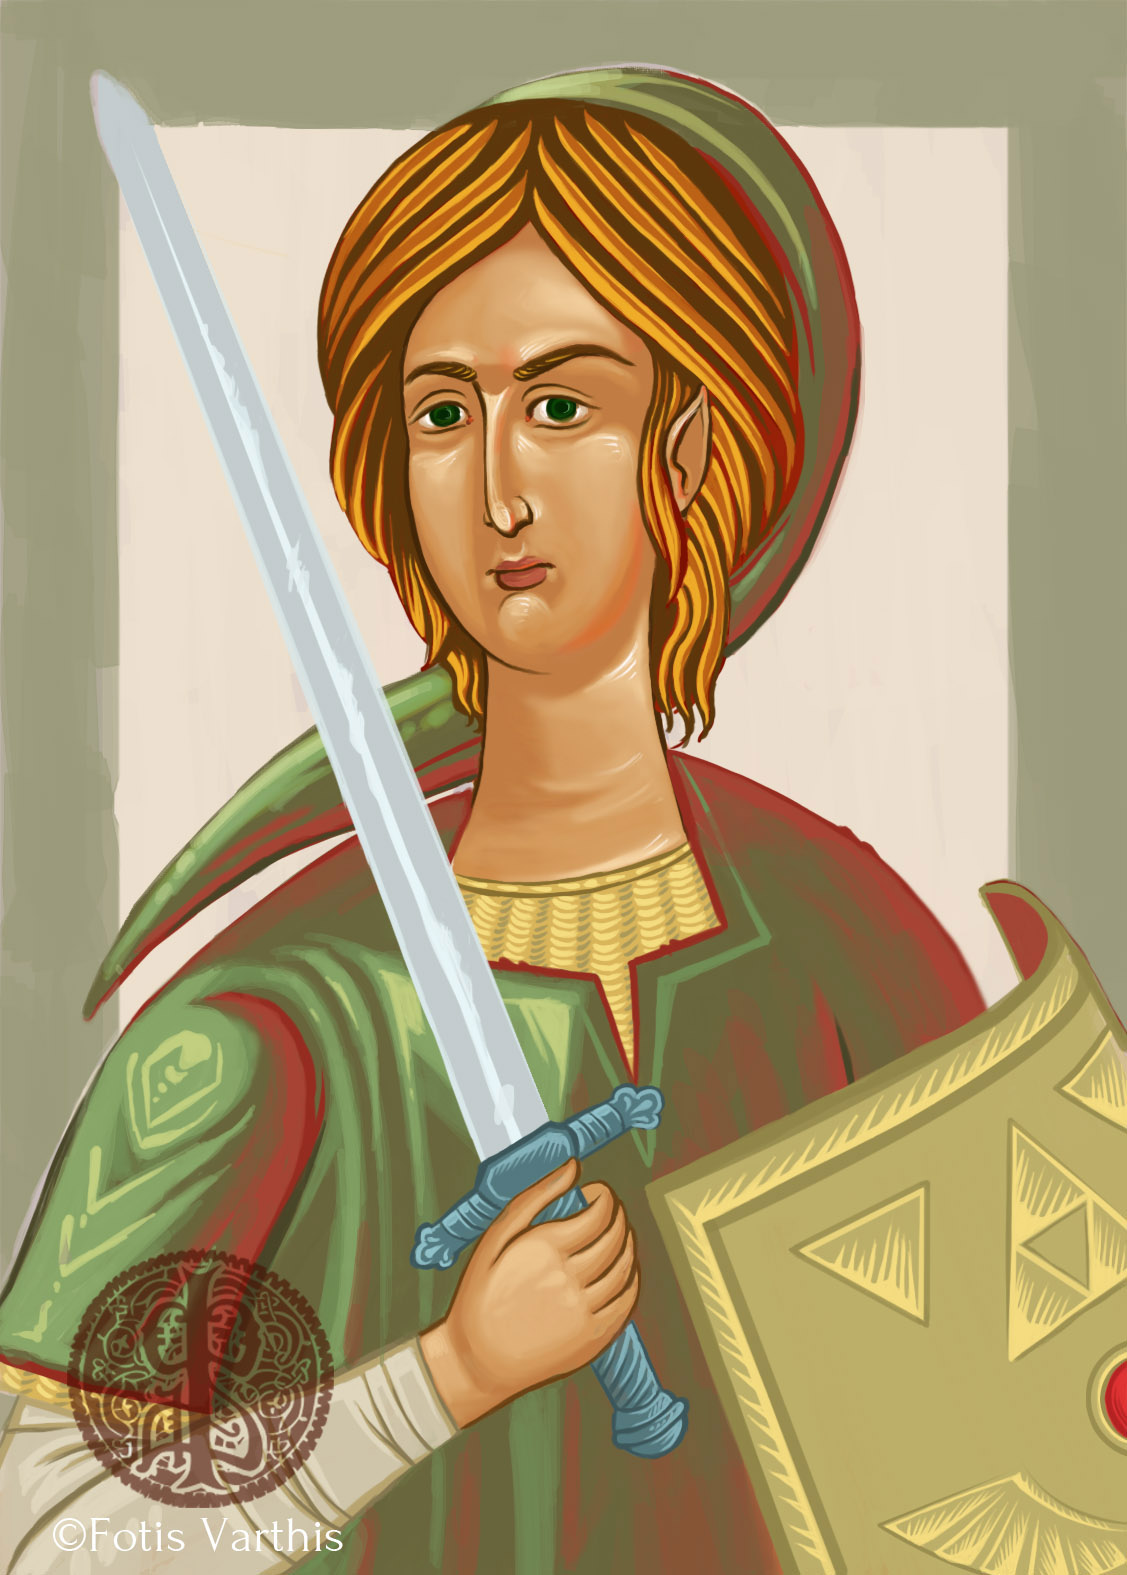 Byzantine Lord of the rings Game of Thrones star wars zelda breaking bad iconography